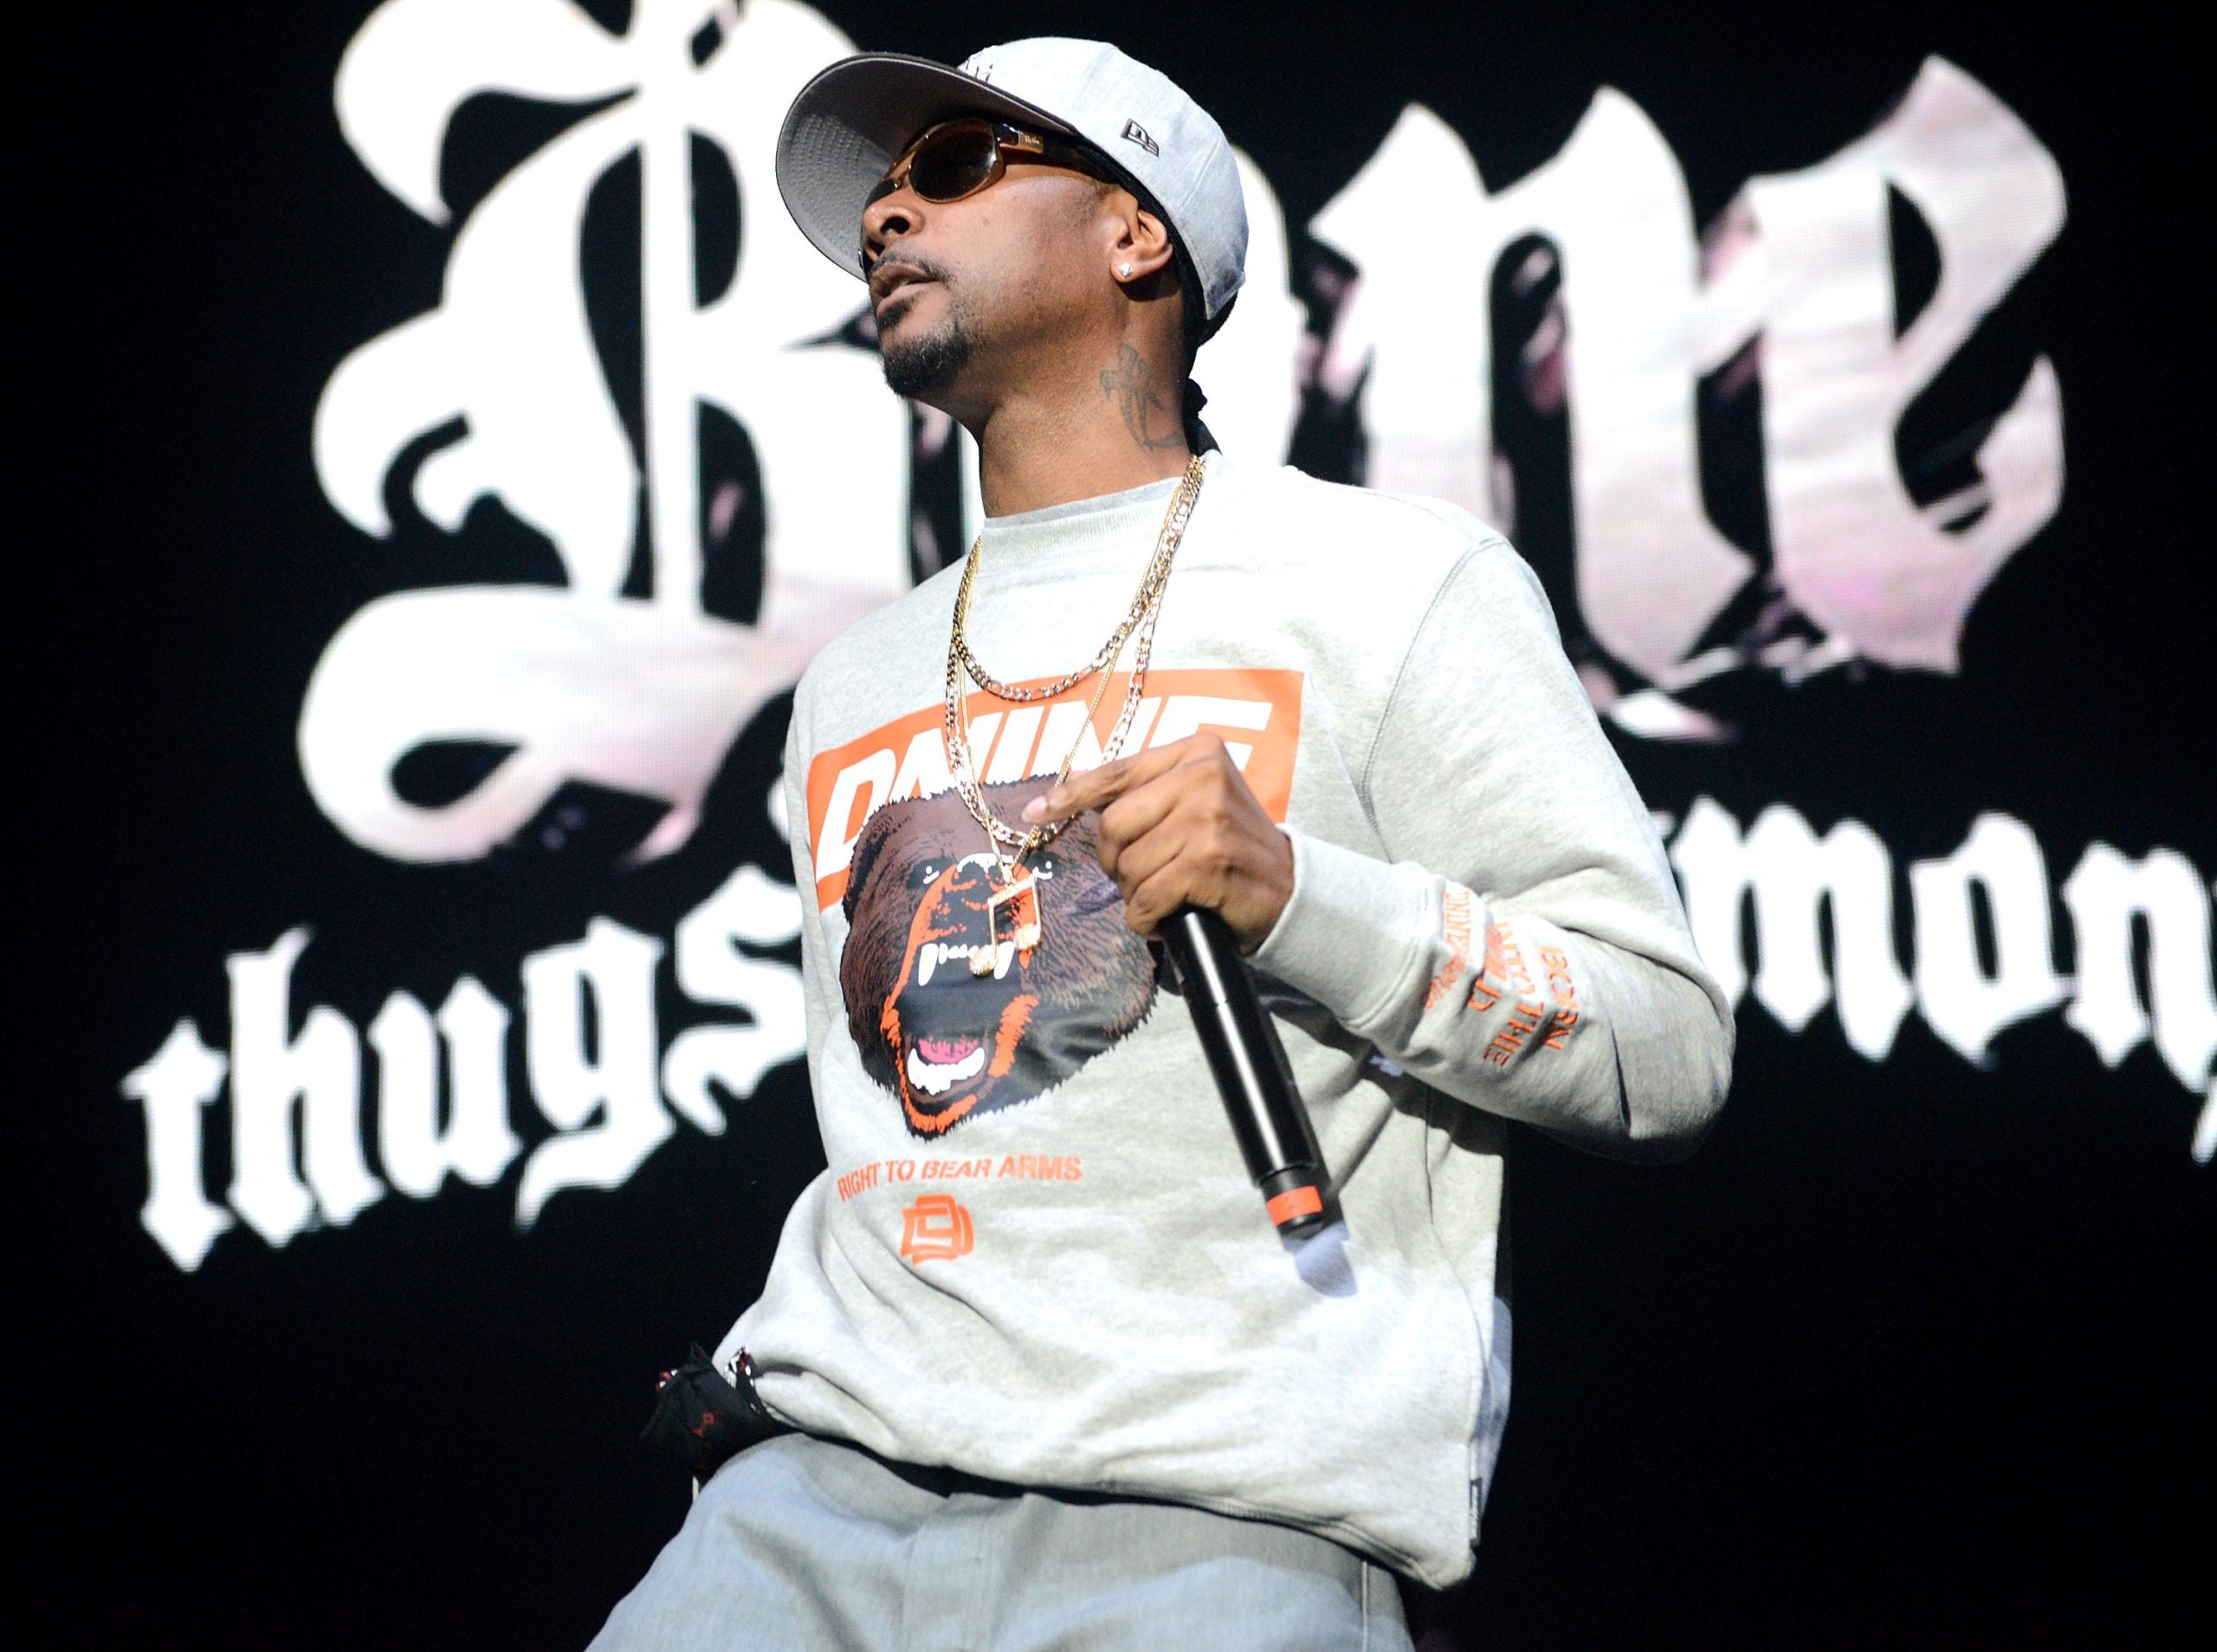 Health Update: Krayzie Bone Revealed He Fought For His Life For 9 Days Straight